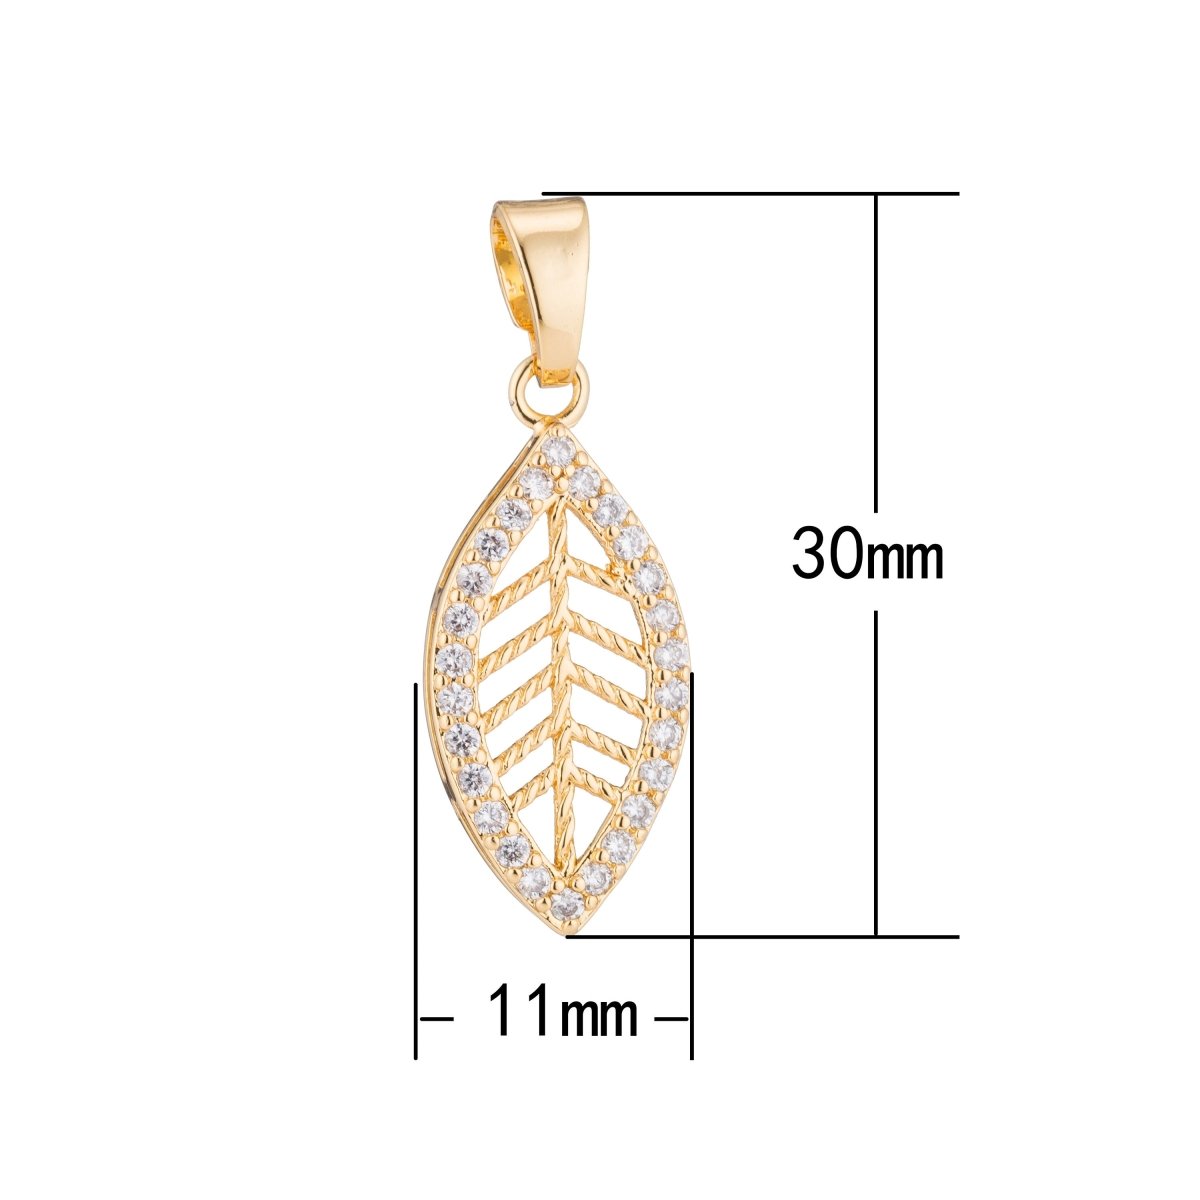 On Sale! CLEARANCE! Gold Filled Leaf, Nature, Tree, Foliage, Life, Autumn, Spring, DIY Cubic Zirconia Necklace Pendant Charm Bead Bails for Jewelry Making, H315 - DLUXCA